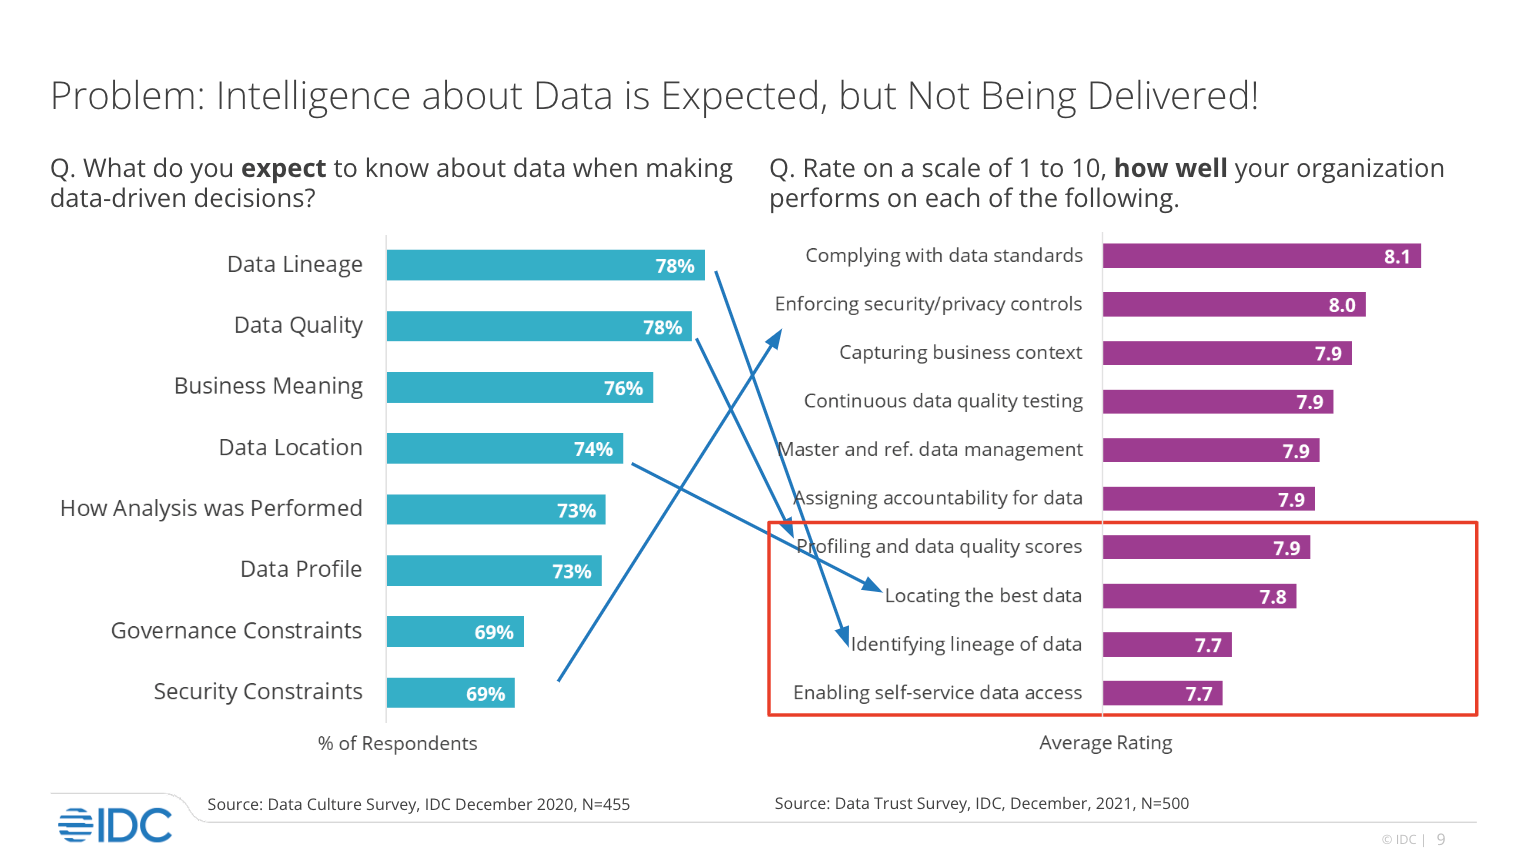 IDC screenshot displaying a graph illustrating the “Problem: Intelligence about Data is Expected, but Not Being Delivered!”